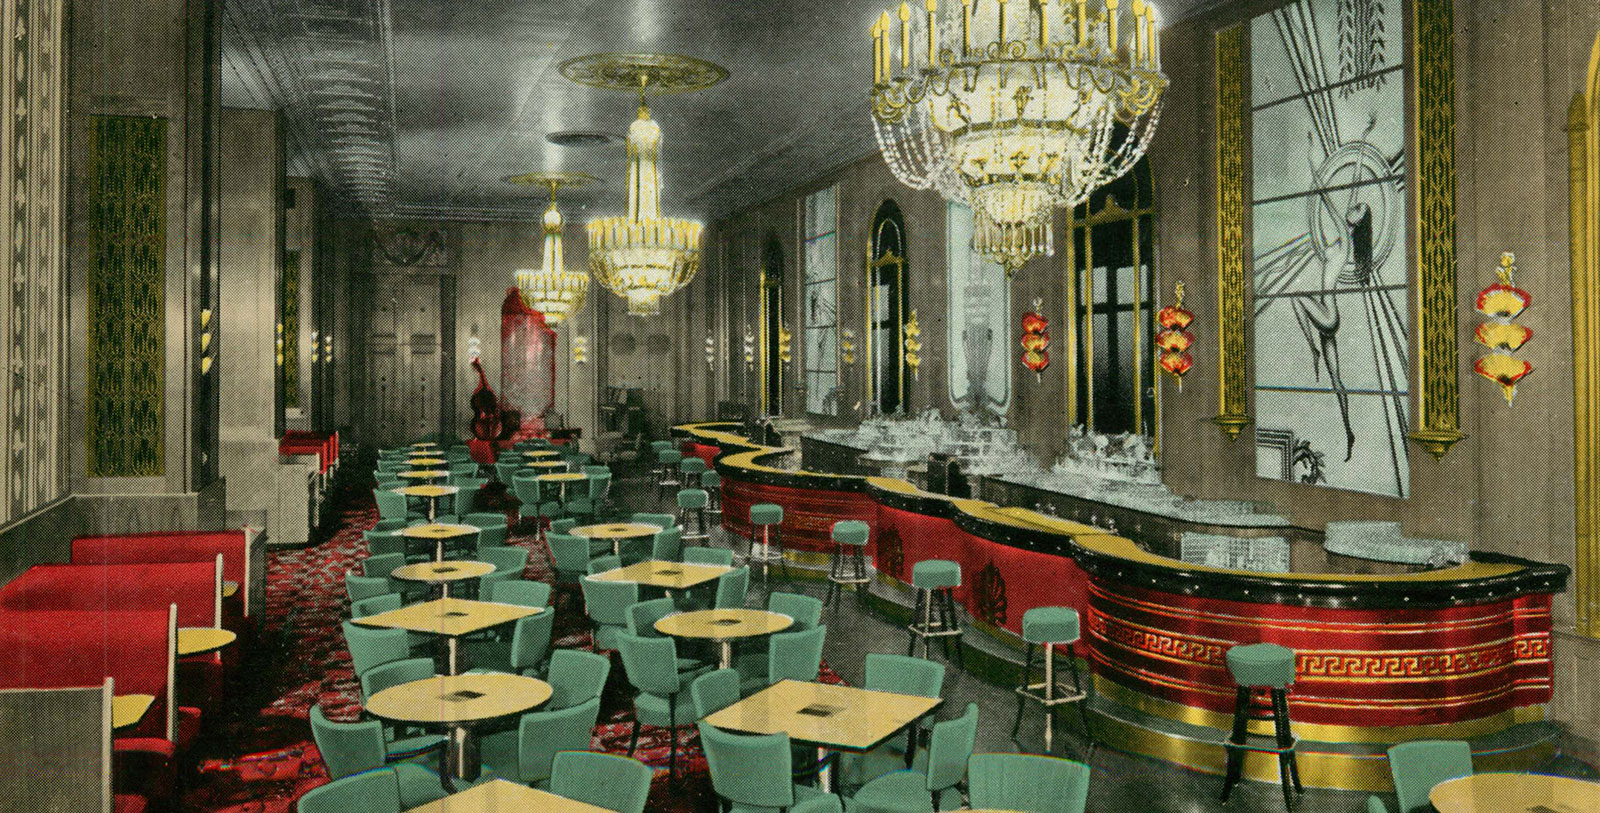 Historic Postcard of Schroeder Hotel Cocktail Lounge, Hilton Milwaukee City Center, 1927, Member of Historic Hotels of America, Milwaukee, Wisconsin, Discover